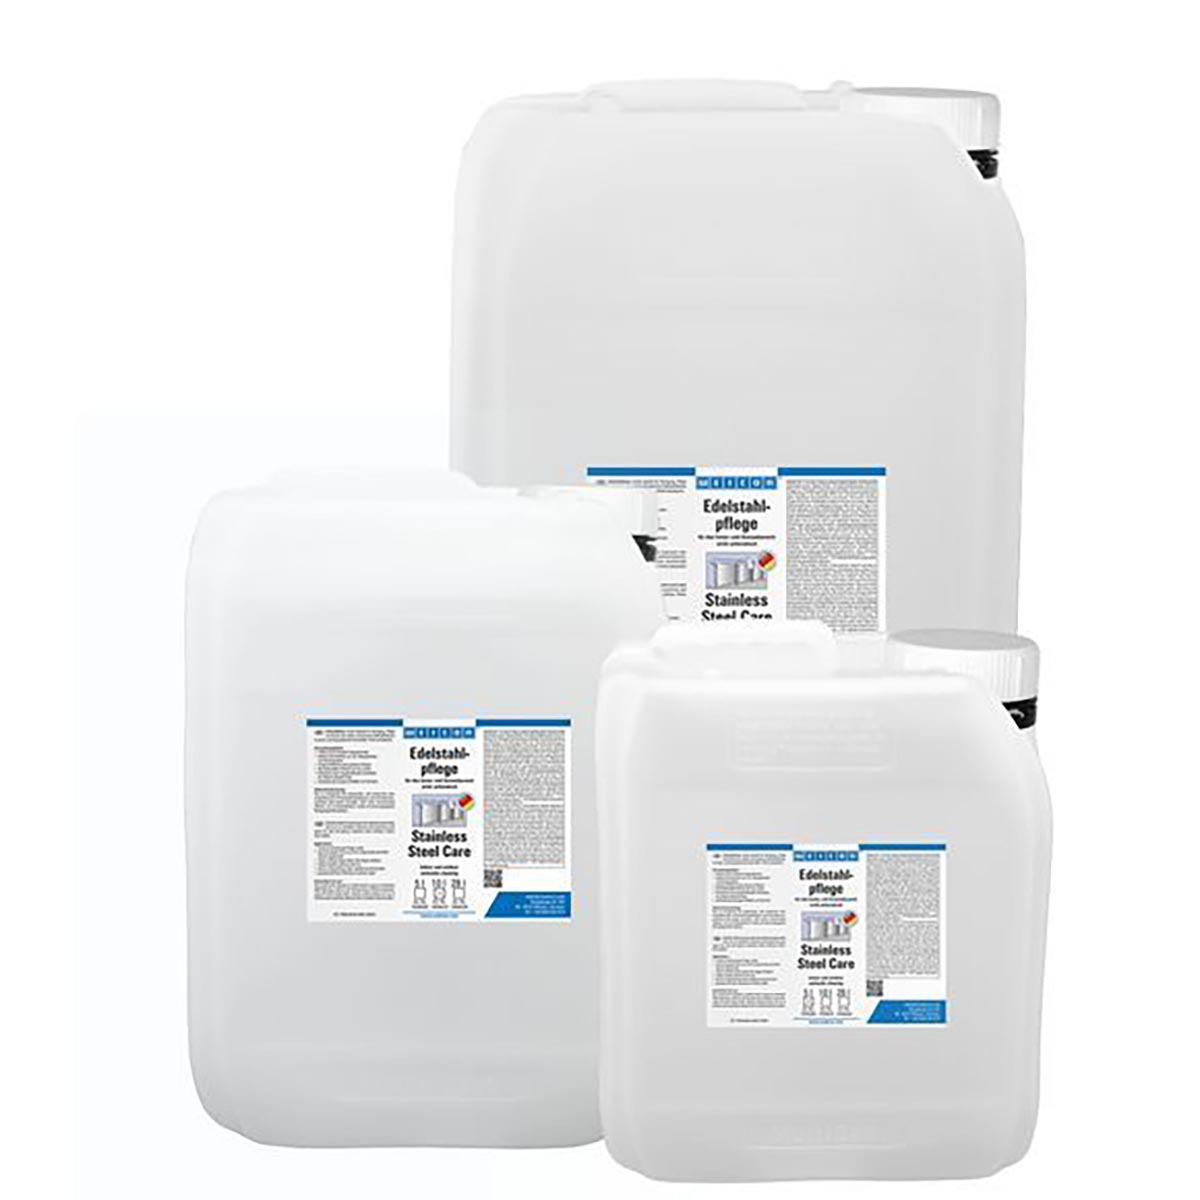 Weicon Stainless Steel Care Fluid Range